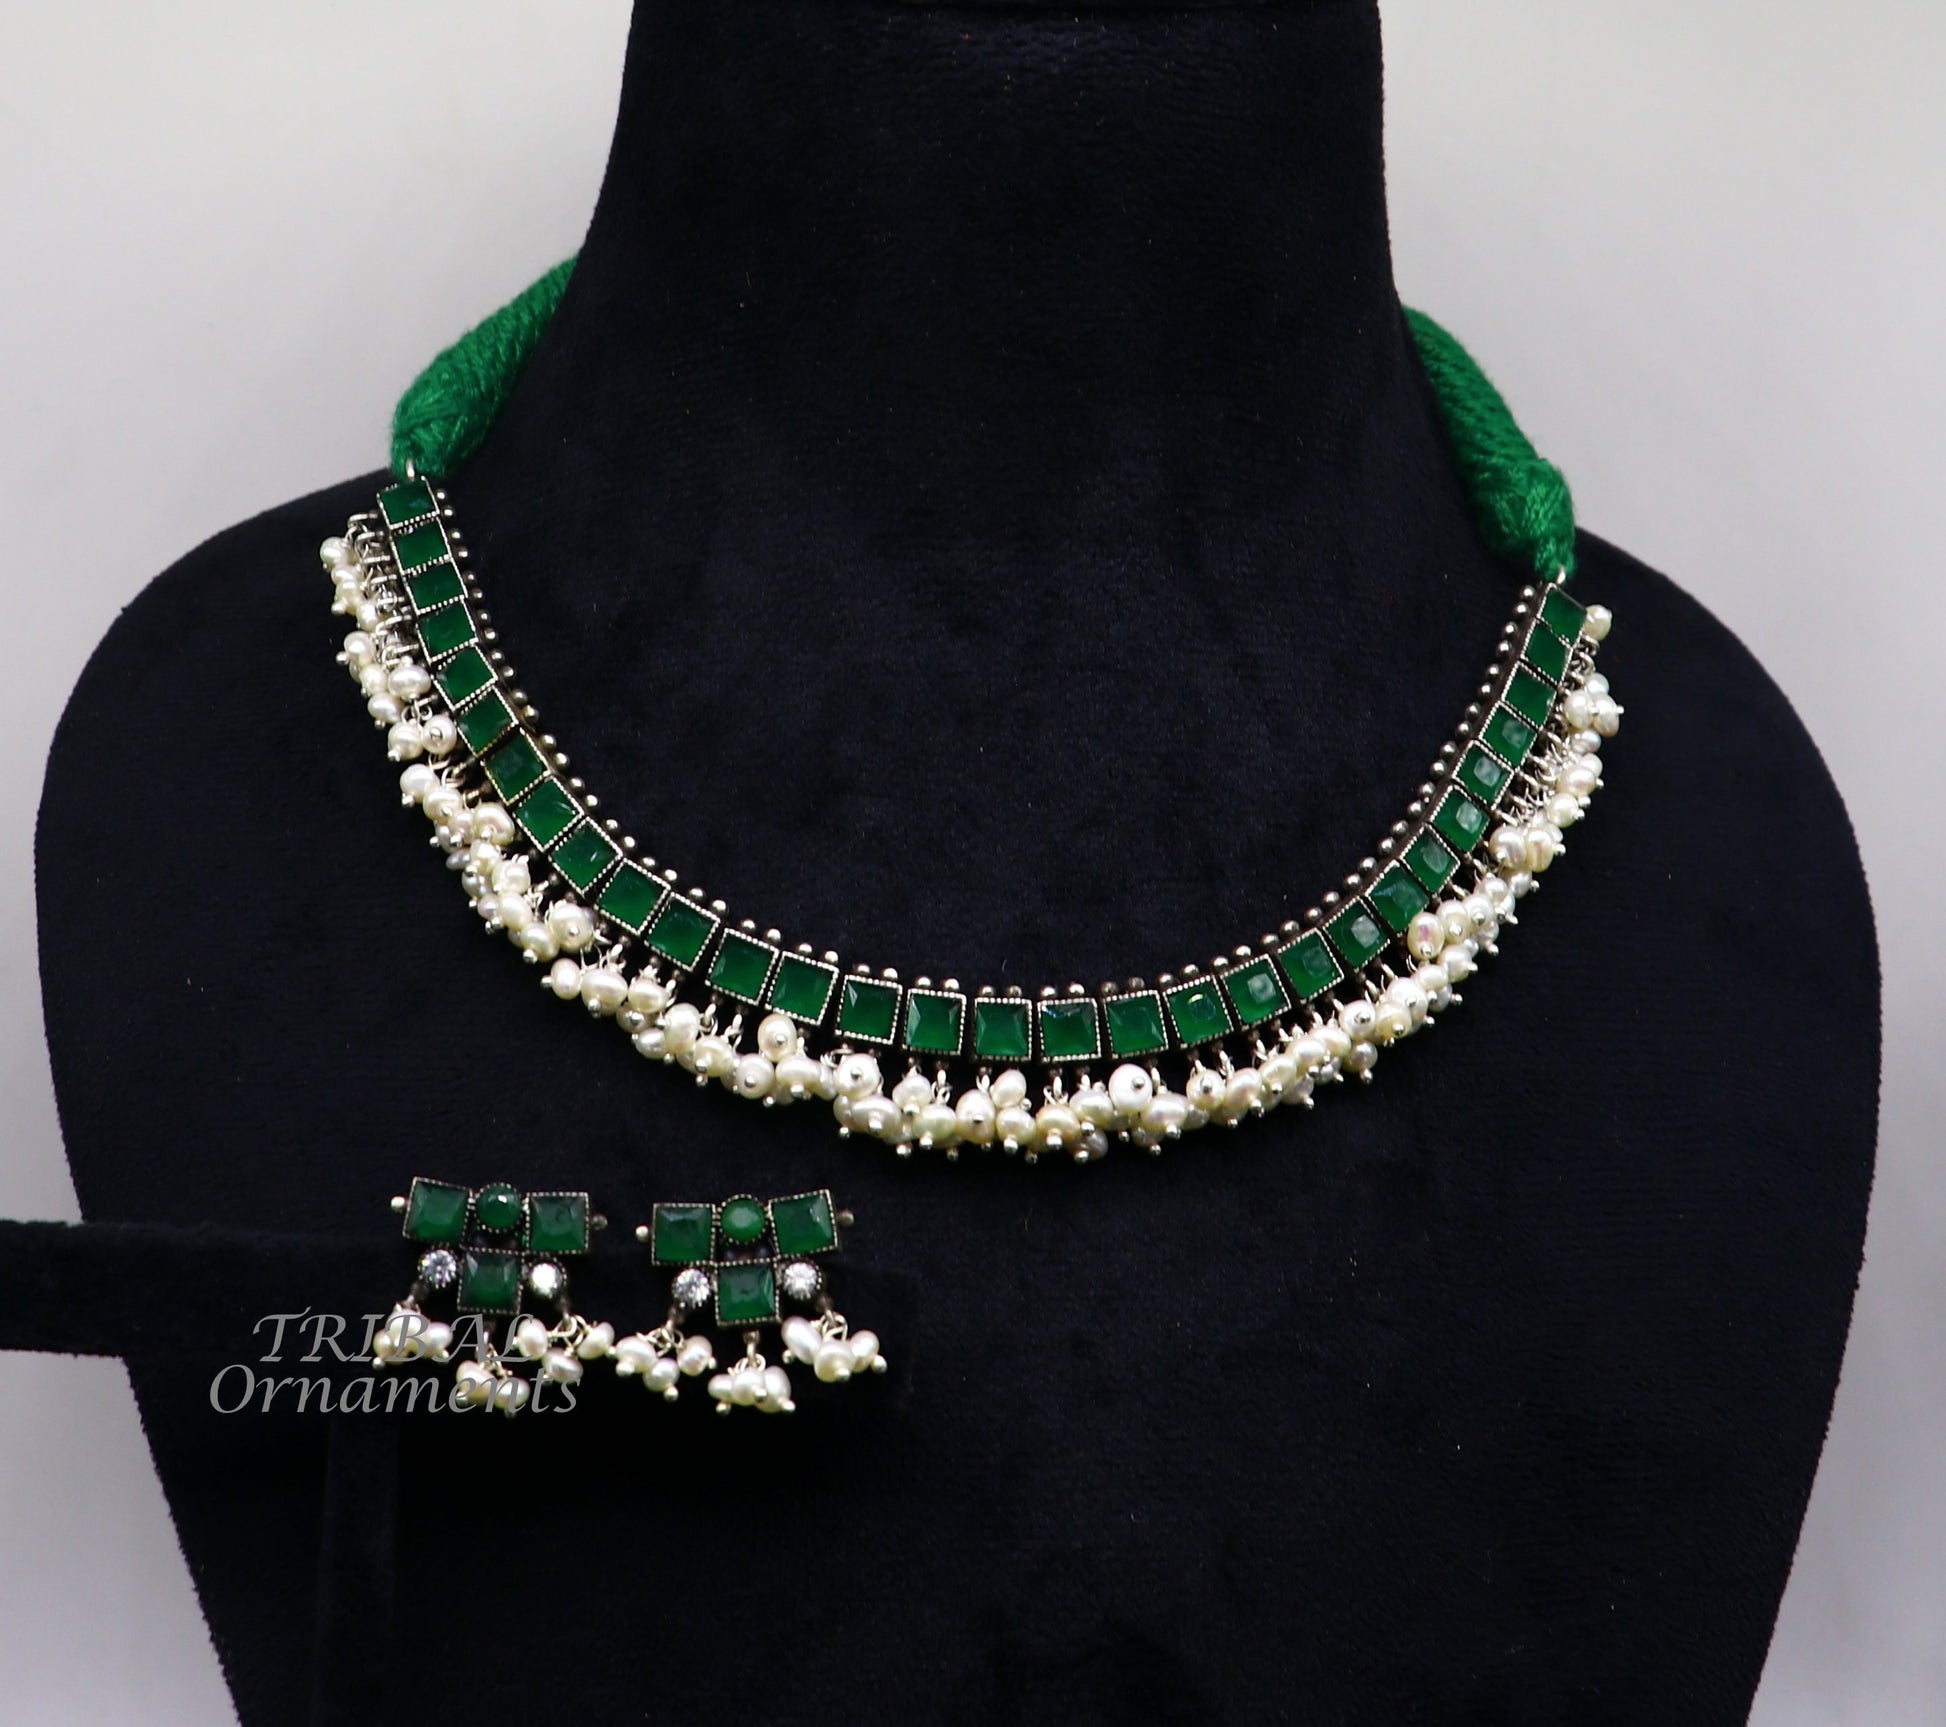 925 sterling silver customized guttapusalu necklace set amazing green stone and hanging pearl ethnic tribal brides jewelry set512 - TRIBAL ORNAMENTS